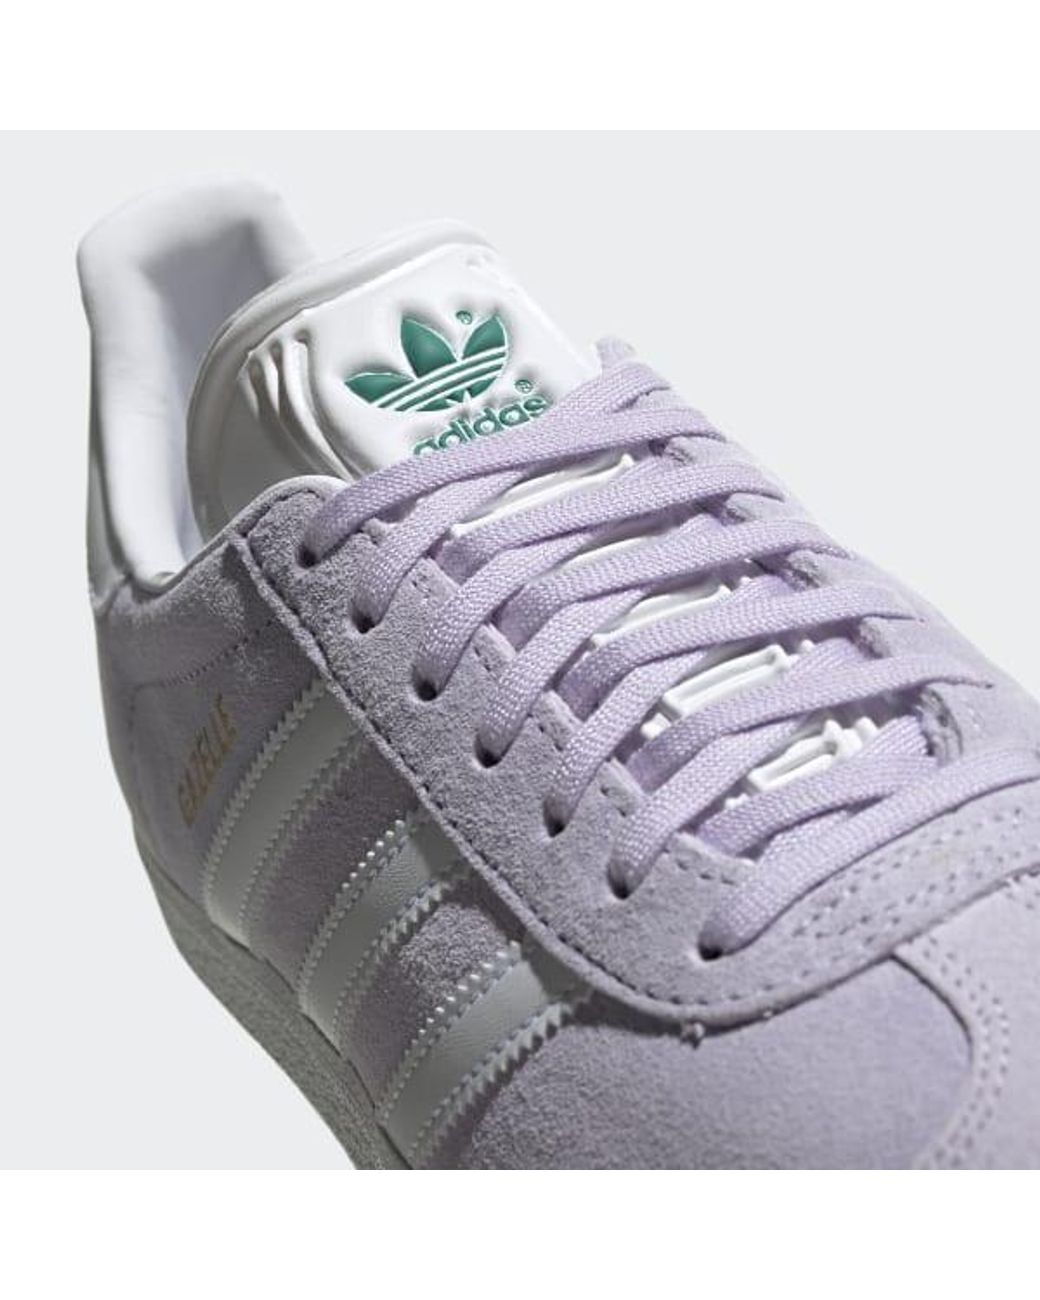 adidas Gazelle Shoes in Lilac (Purple) - Save 29% - Lyst